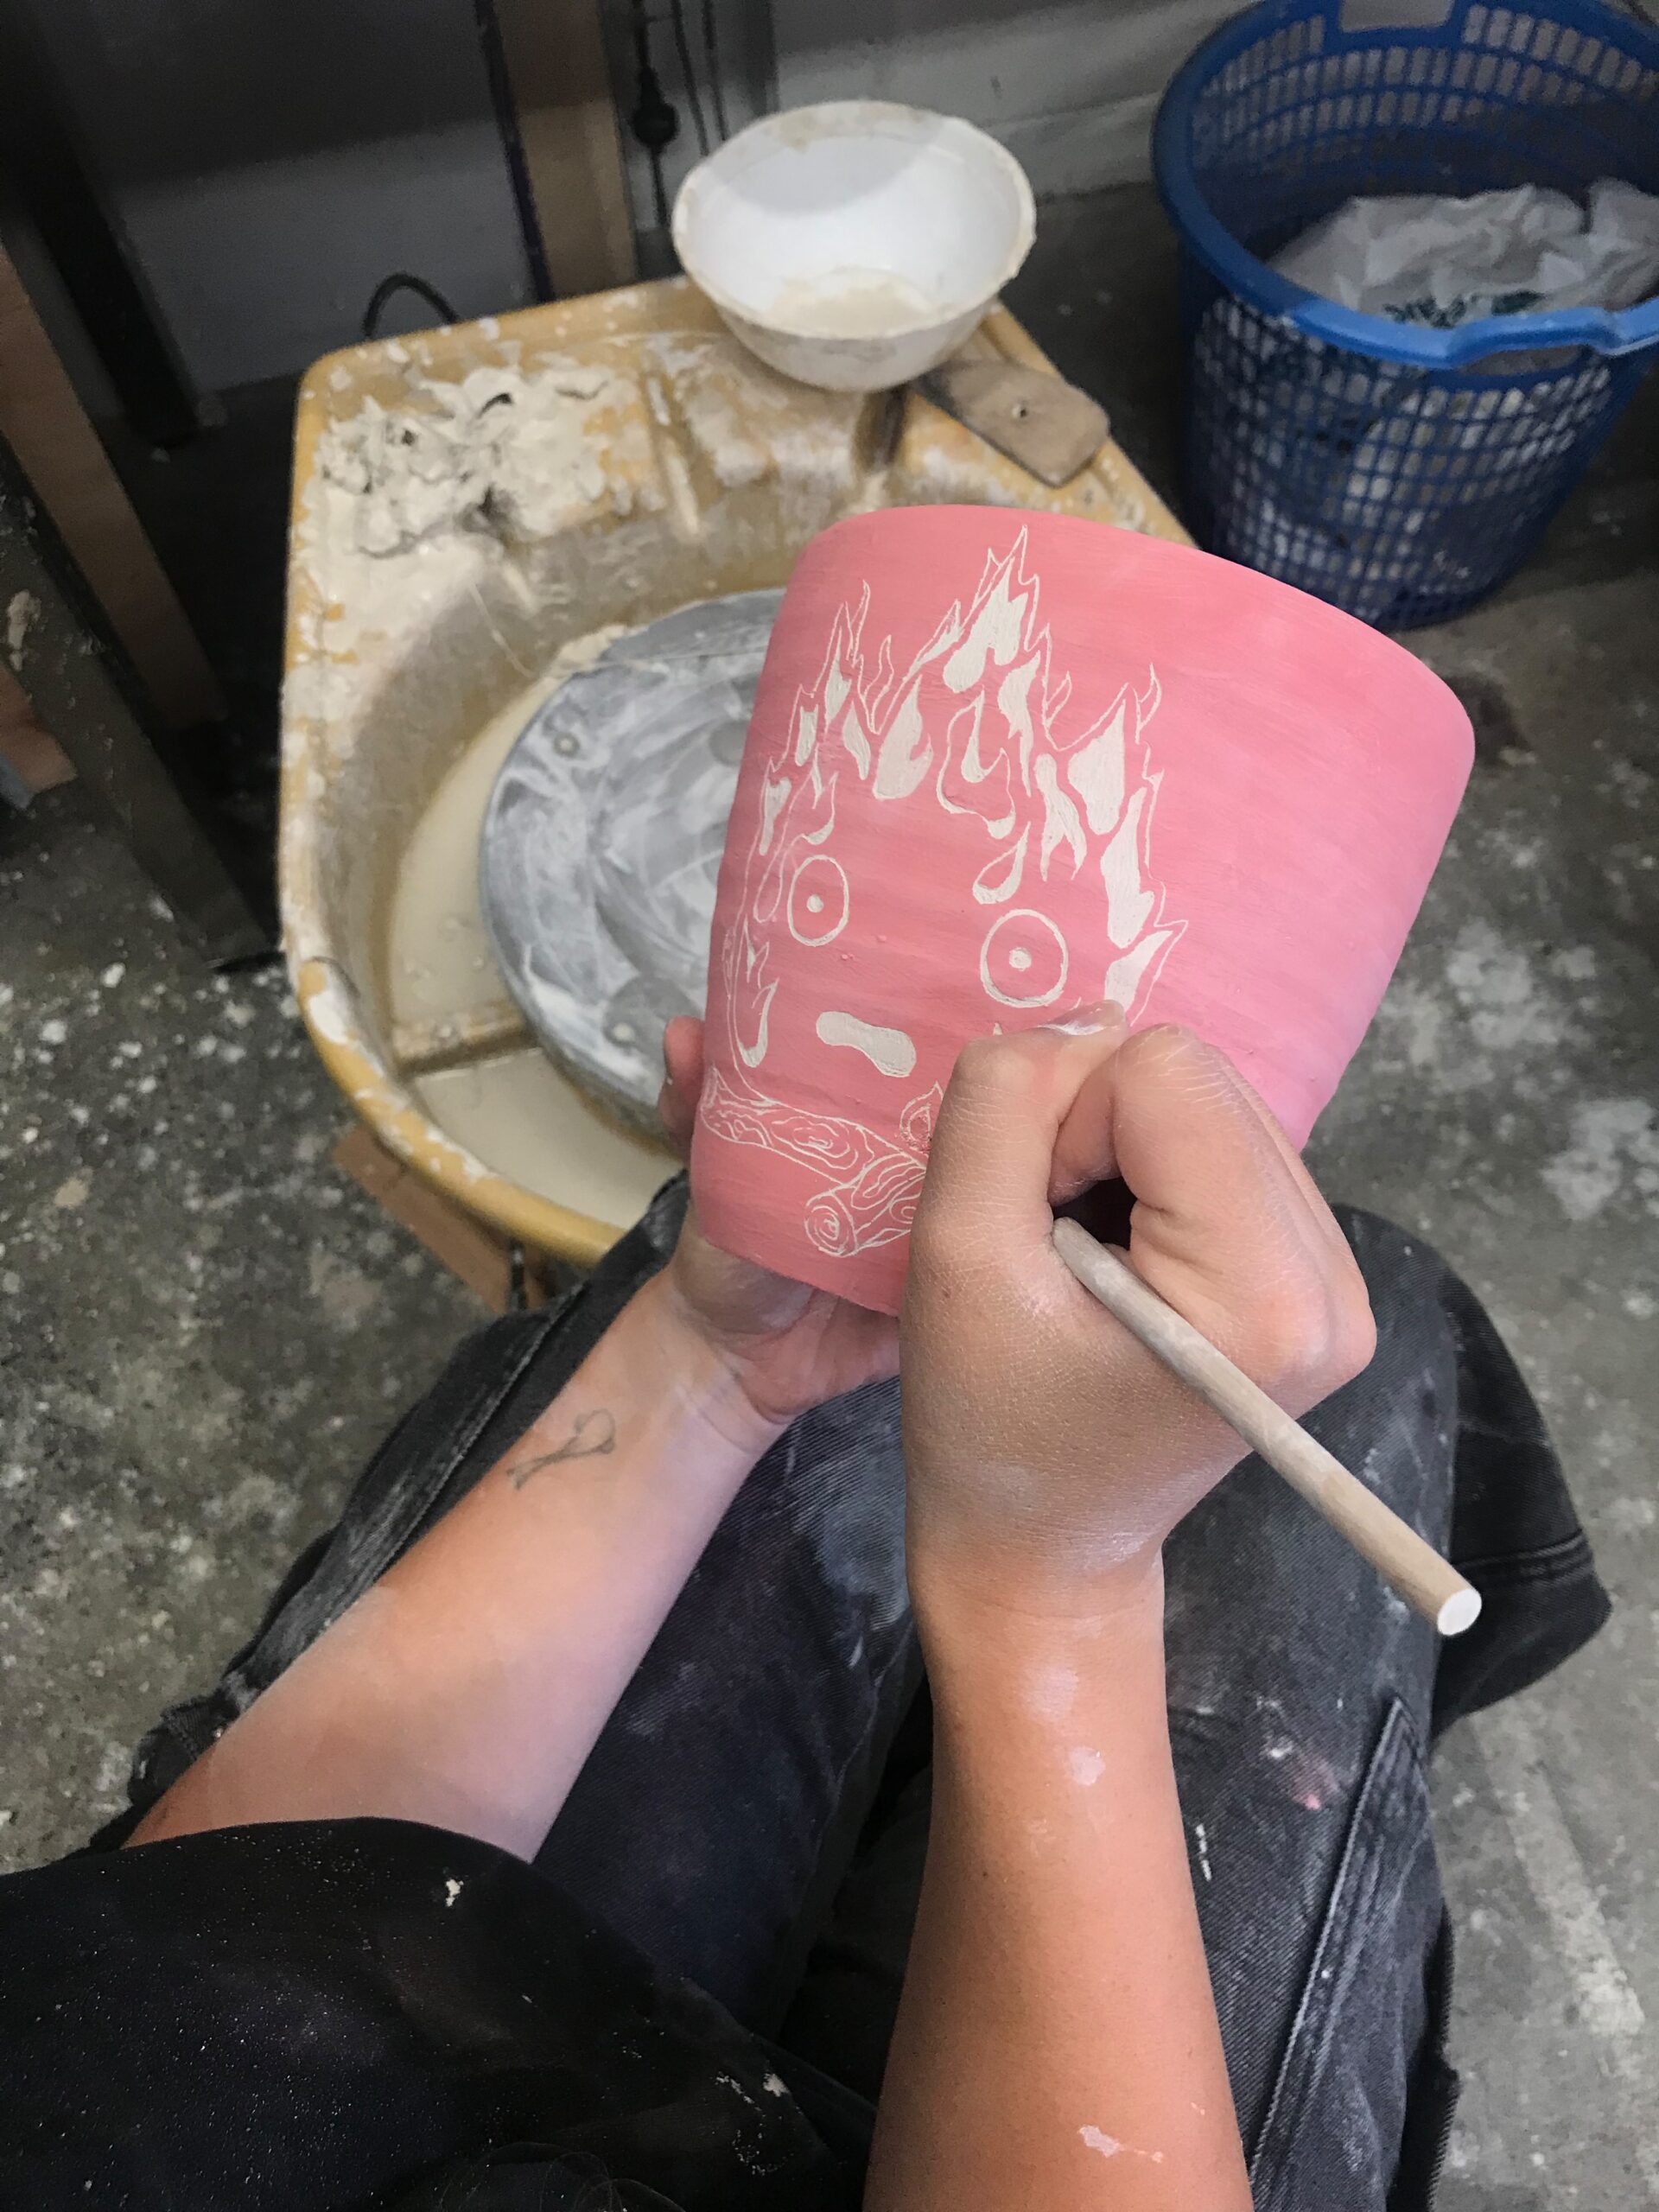 Image of a pink ceramic pot being decorated at the Artosaurus Studio and workshop space as part of their Artist Profile with Art Trails Tasmania